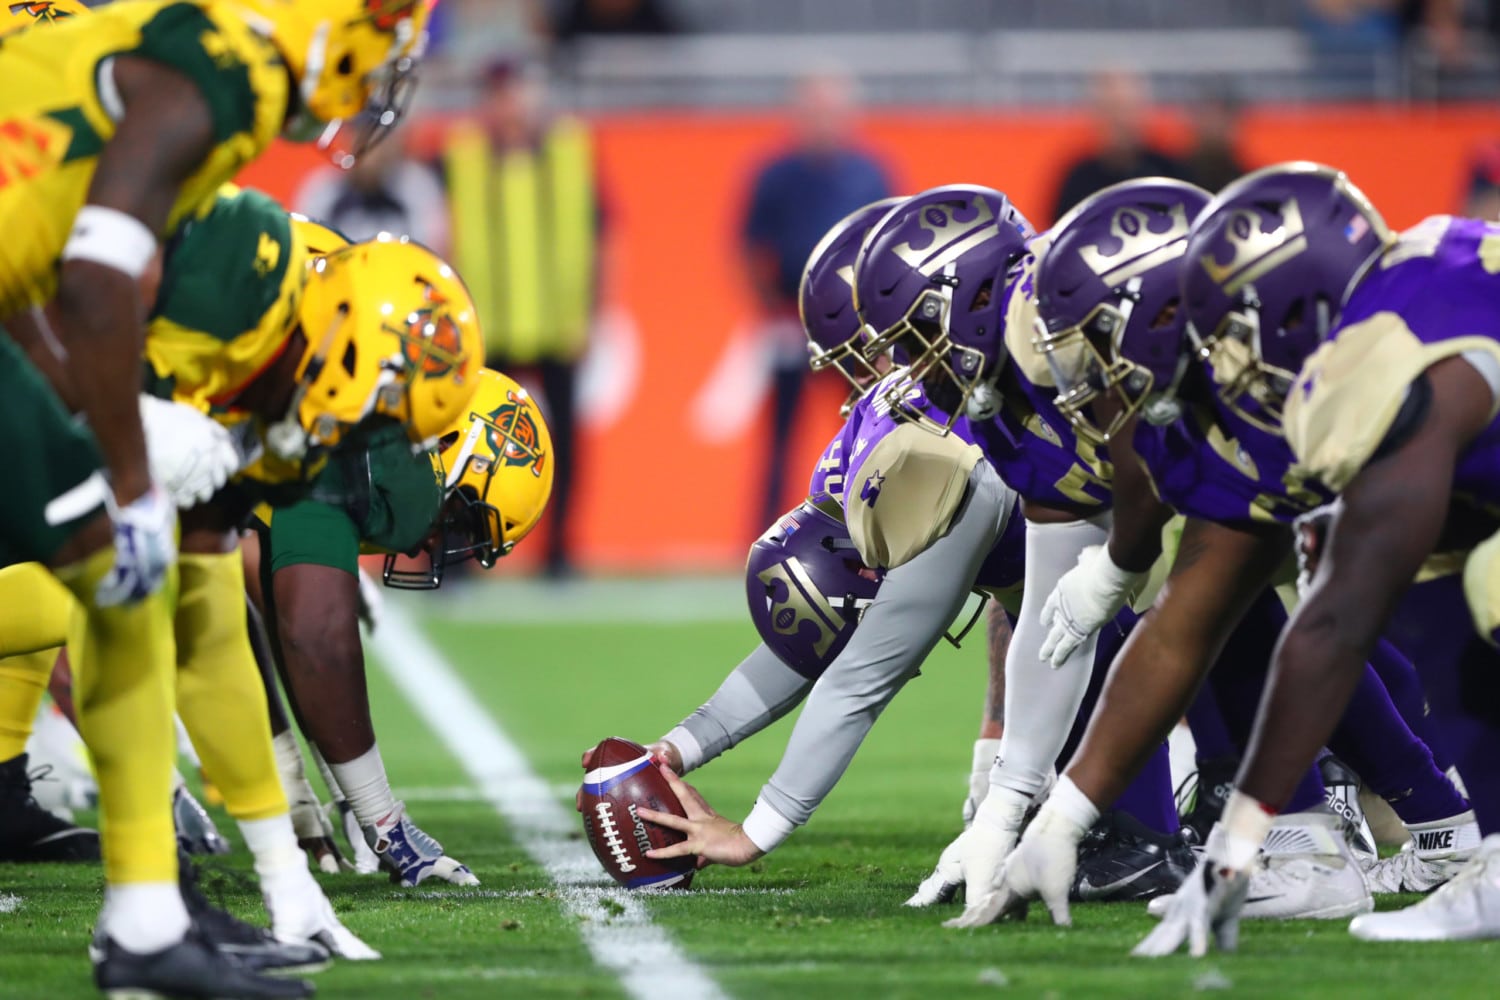 Alliance of American Football (AAF) team at line of scrimmage before start of a play